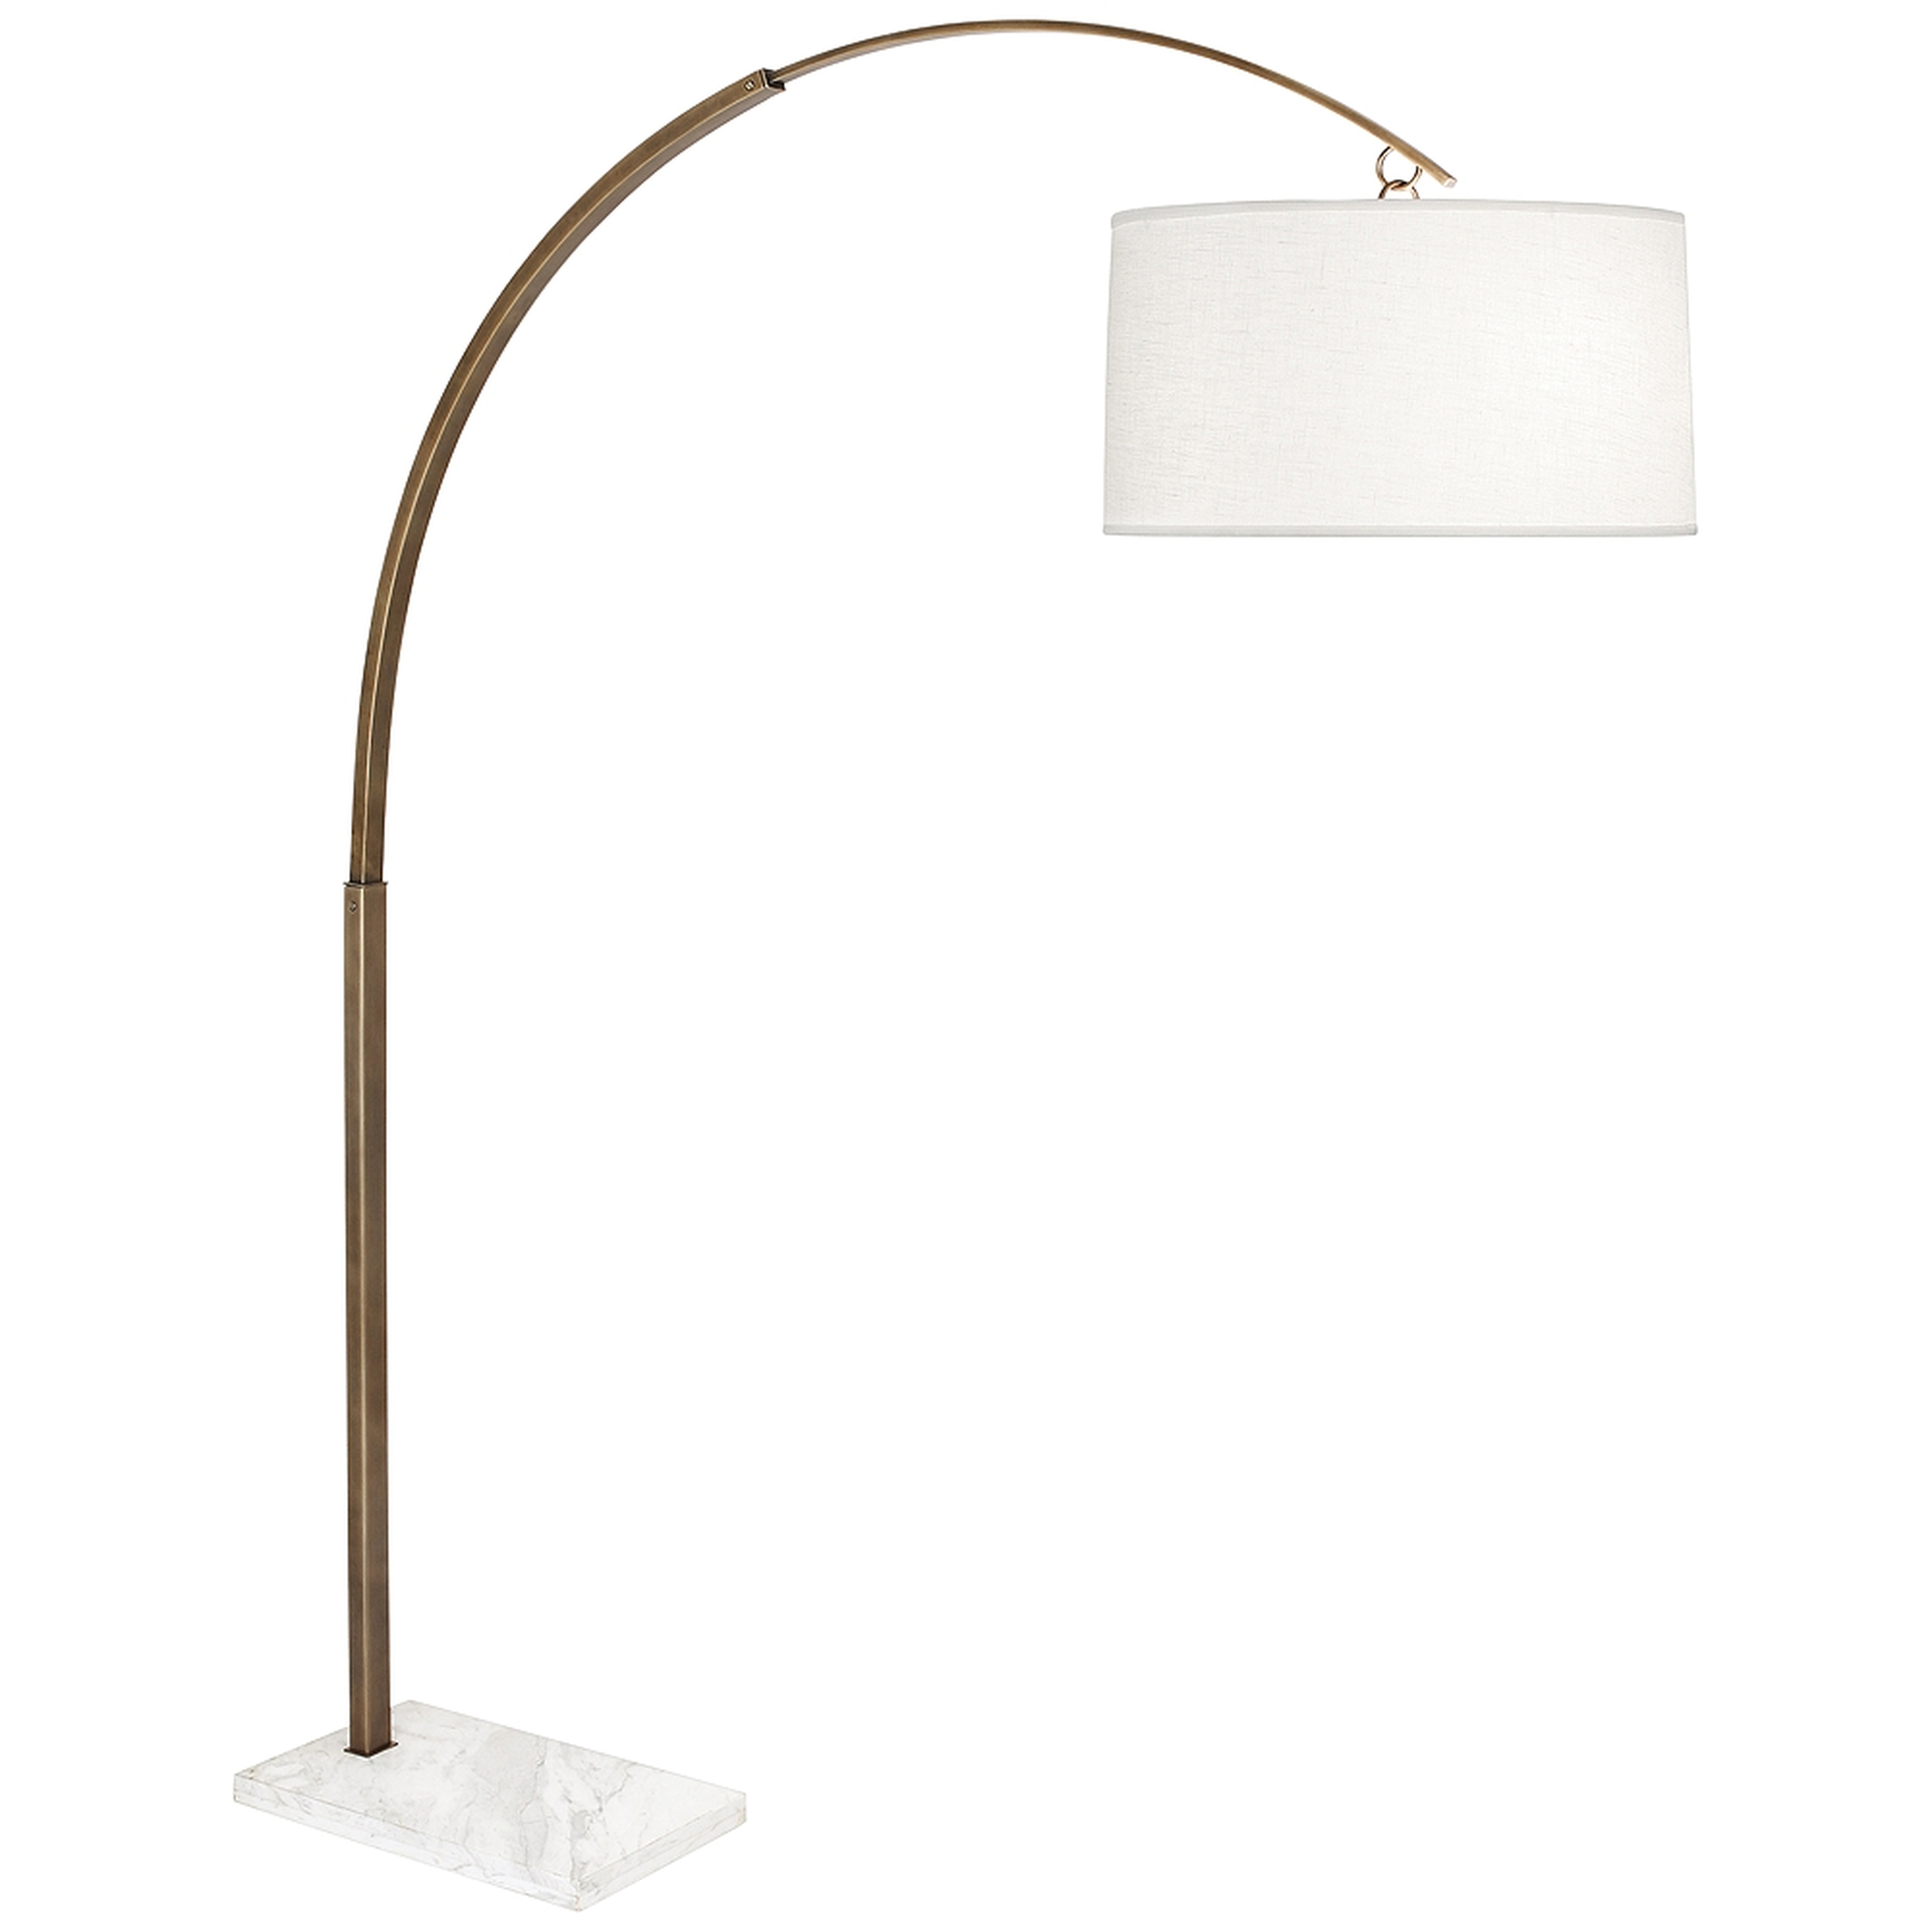 Robert Abbey Archer Small Warm Brass Arch Floor Lamp - Style # 41C98 - Lamps Plus